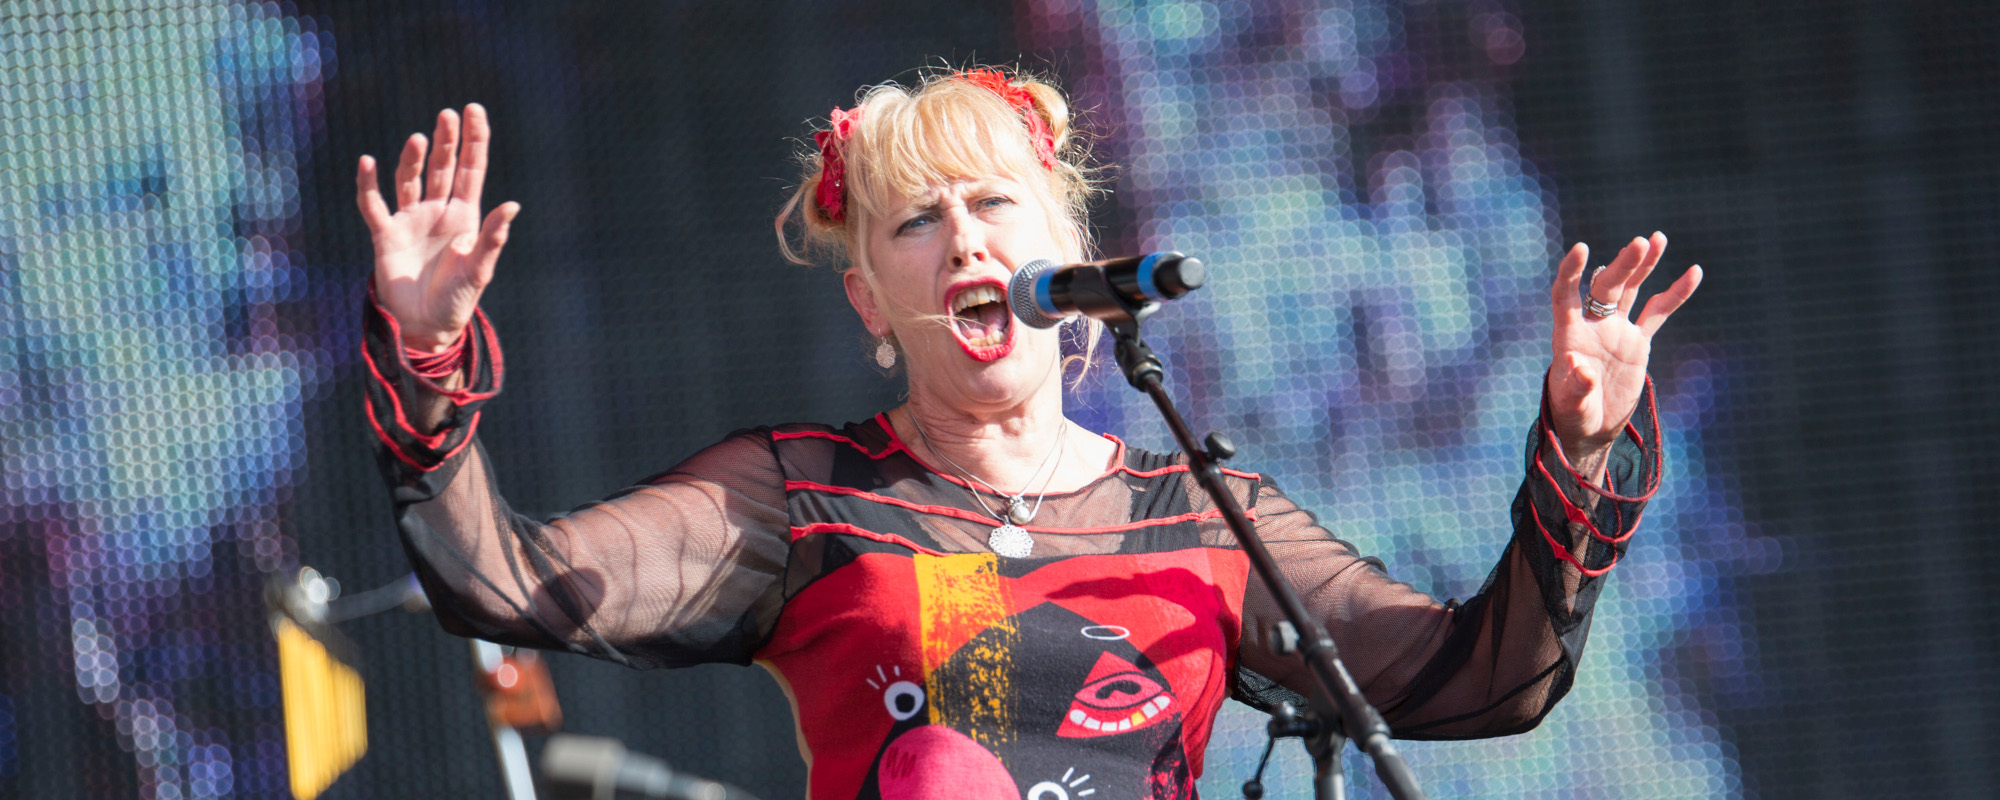 Hazel O’Connor Recovering from “Serious Medical Event” & Medically Induced Coma